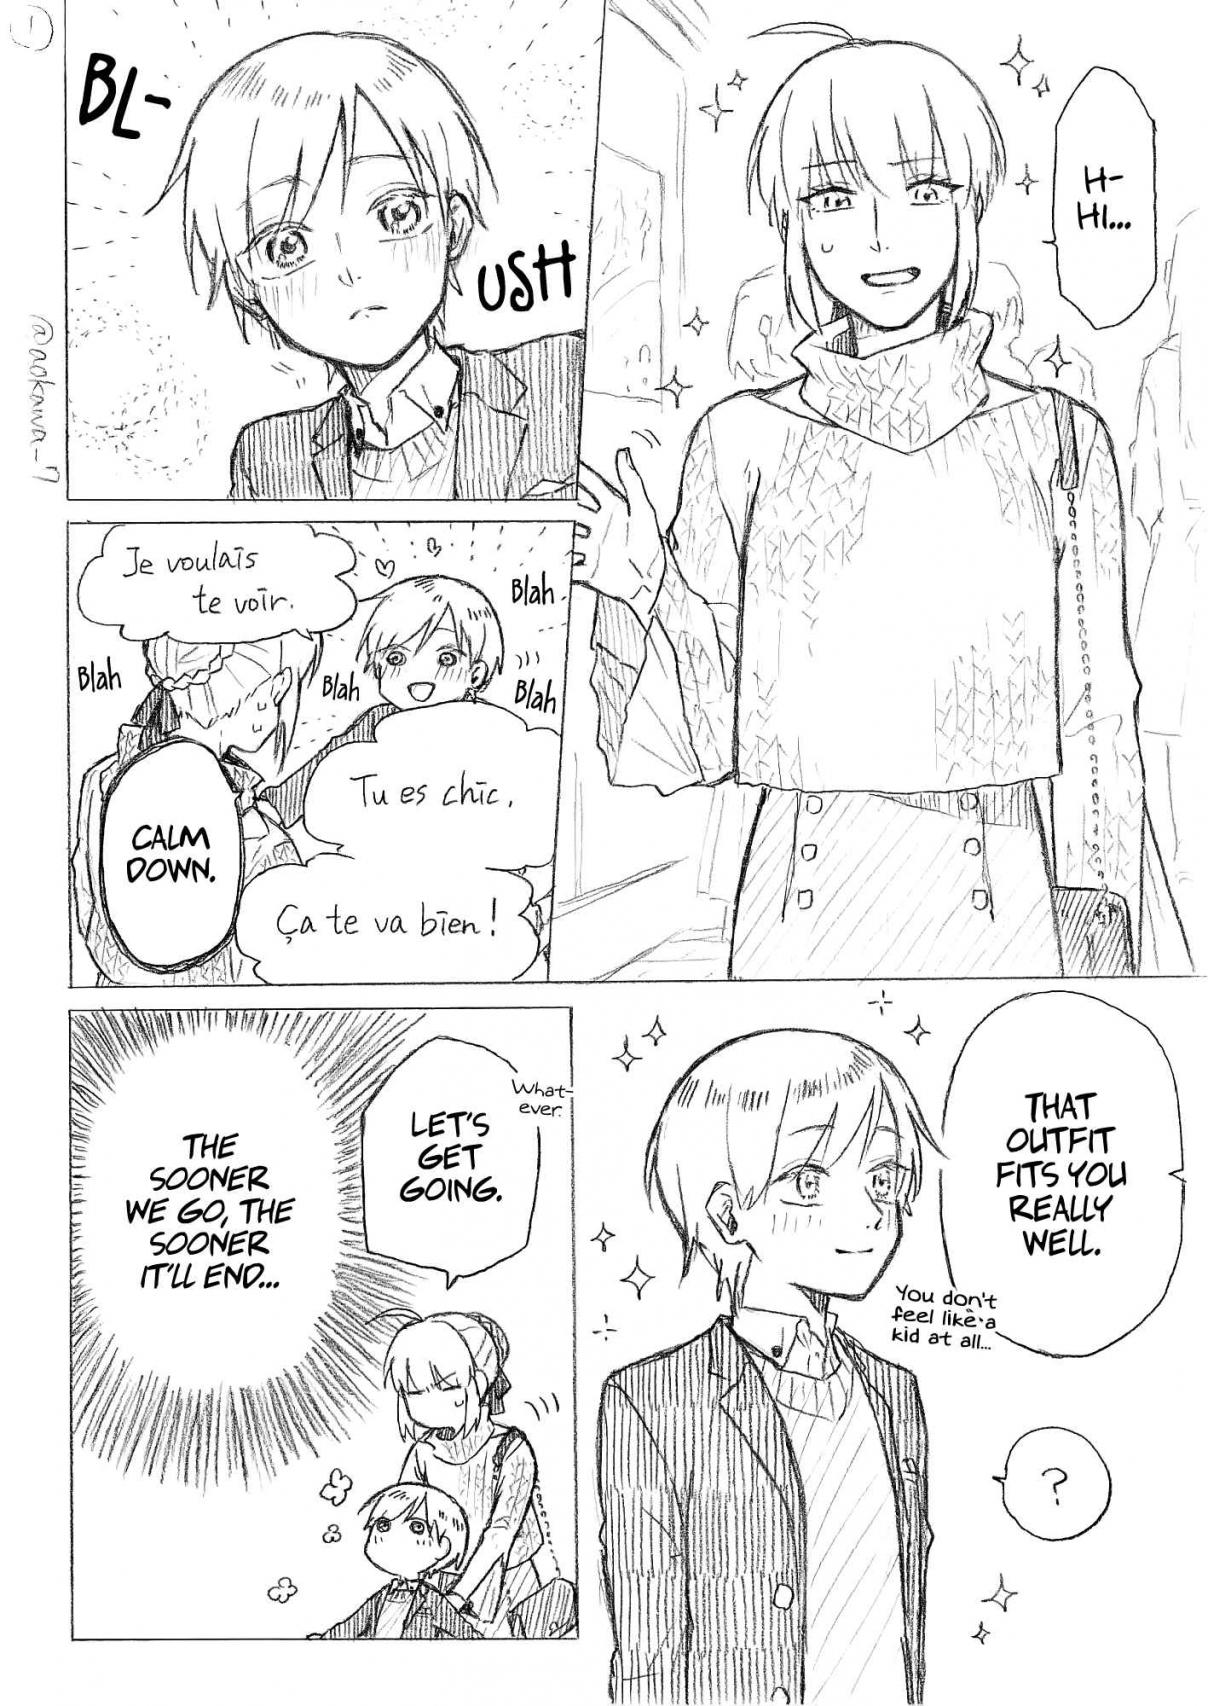 A Crossdressing Cosplayer Gets a Brother Ch. 5.3 Part 15